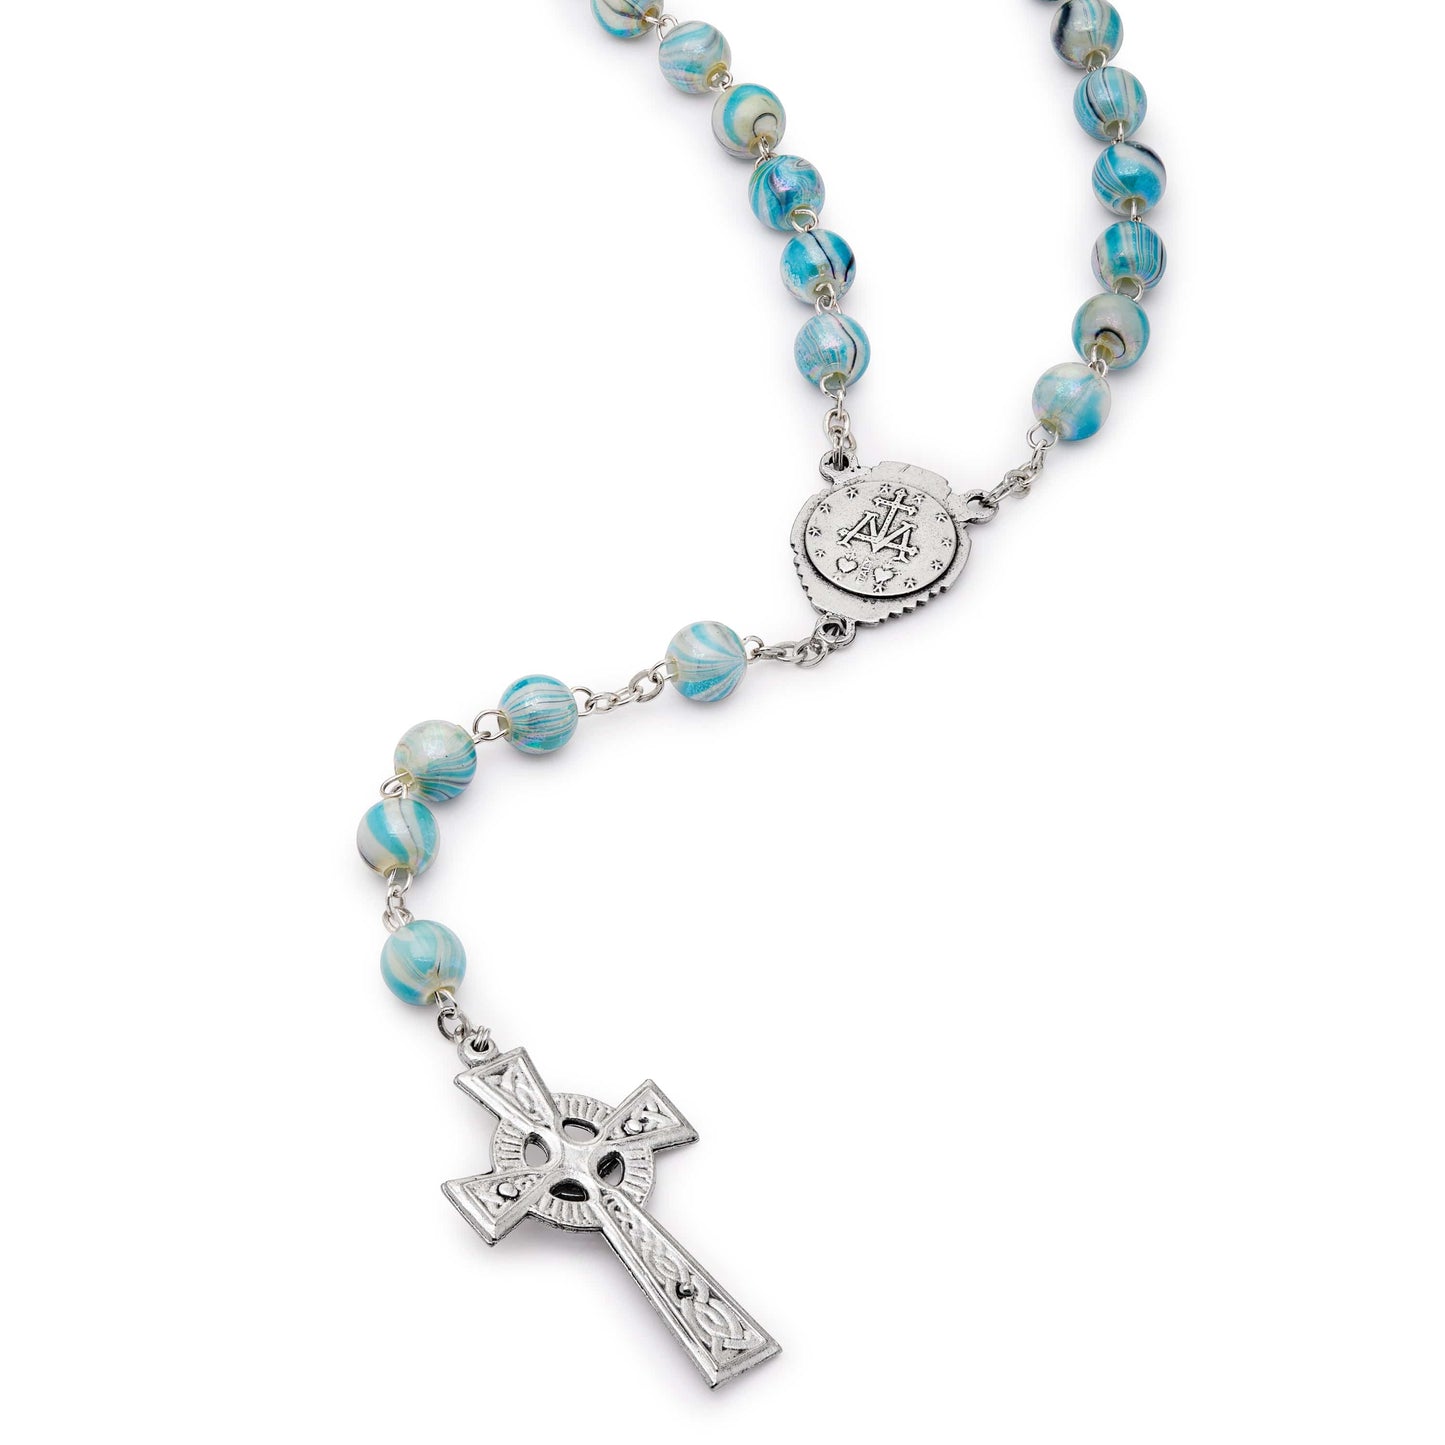 MONDO CATTOLICO Prayer Beads 53 cm (20.86 in) / 8 mm (0.31 in) Our Lady of Miraculous Medal Five Decades Rosary Beads